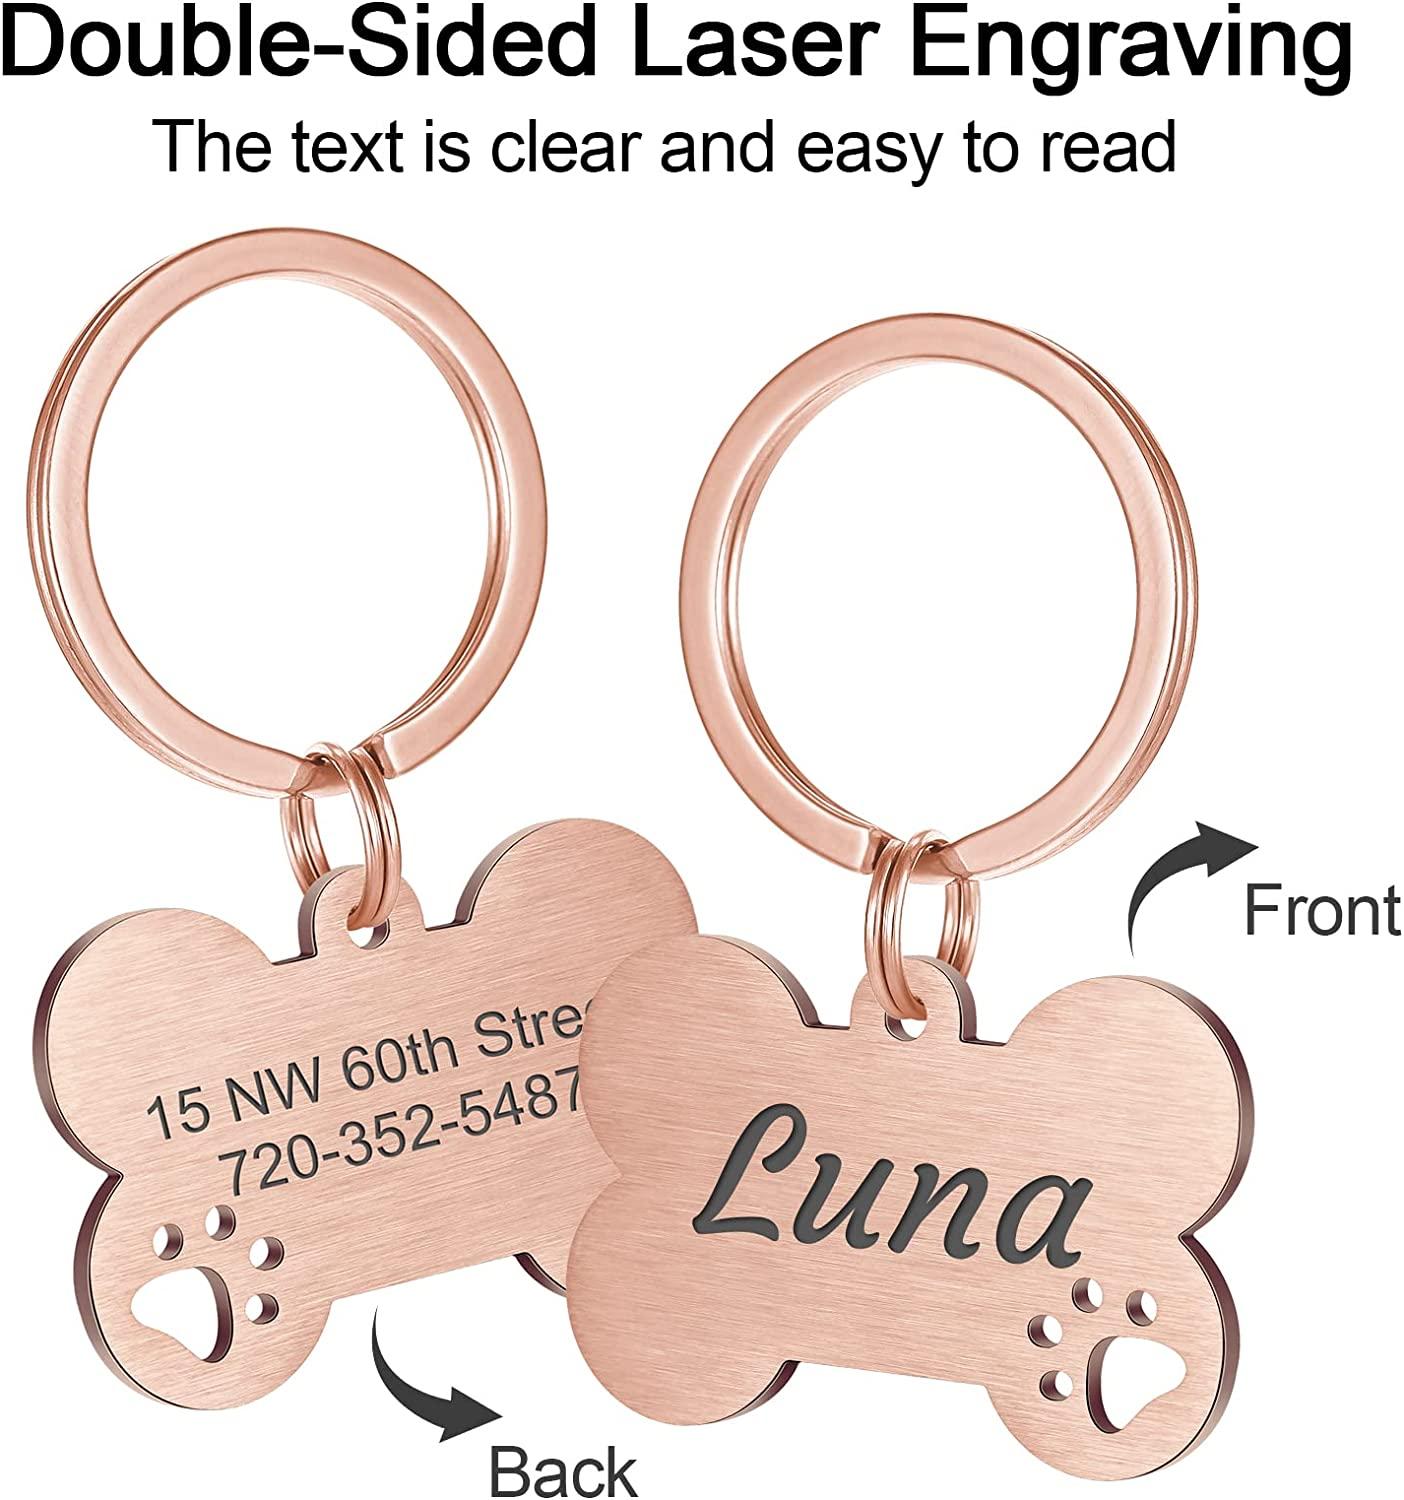 Dog ID Heart Tag Custom Personalized Cat Collar Pendant Engraved